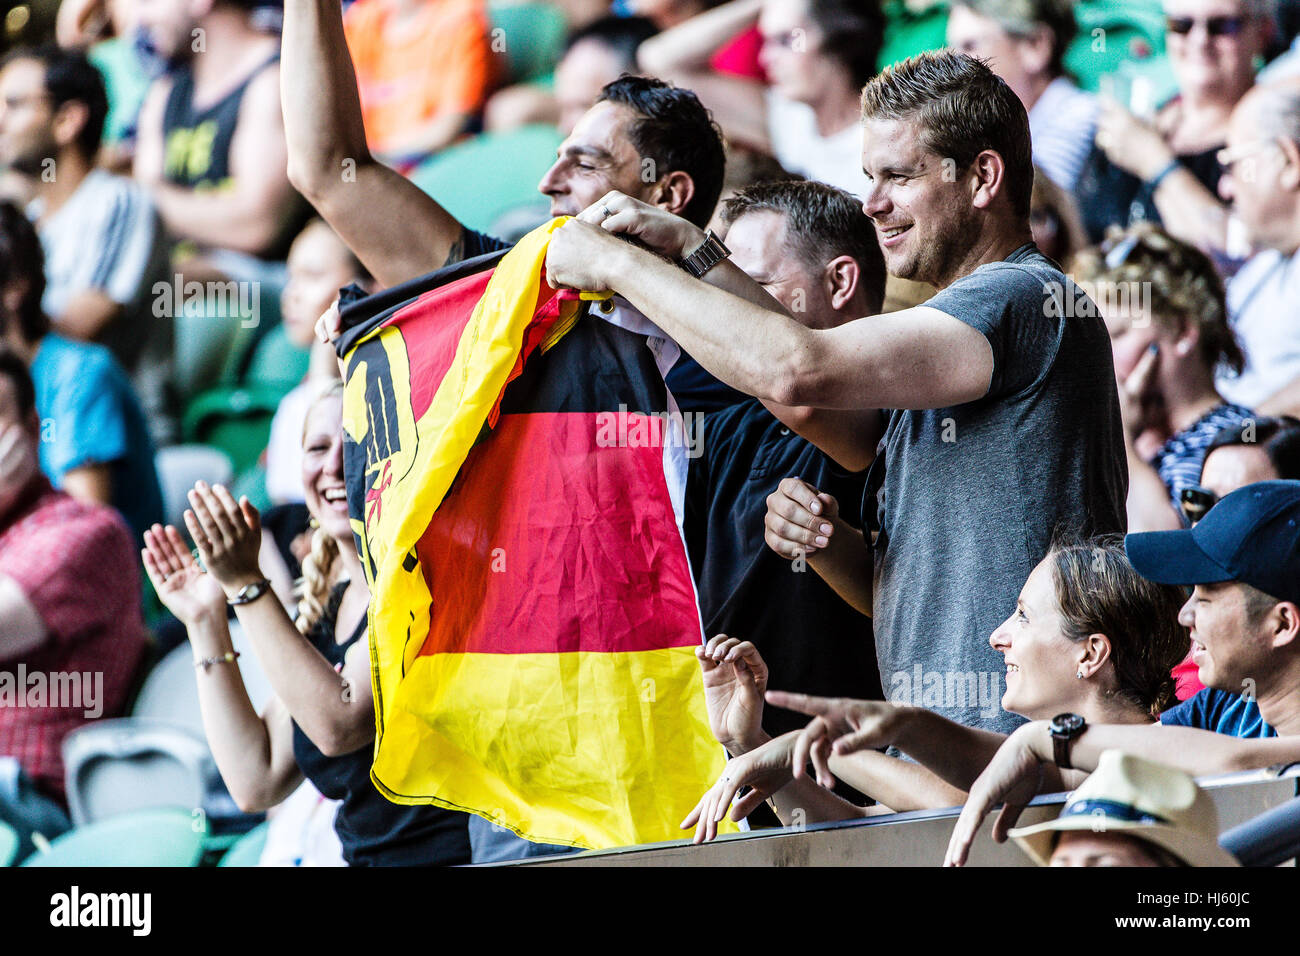 German fans celebrate Mischa Zverev of Germany who ousts world number one Andy Murray during the 2017 Tennis Australian Open at Melbourne Park Stock Photo